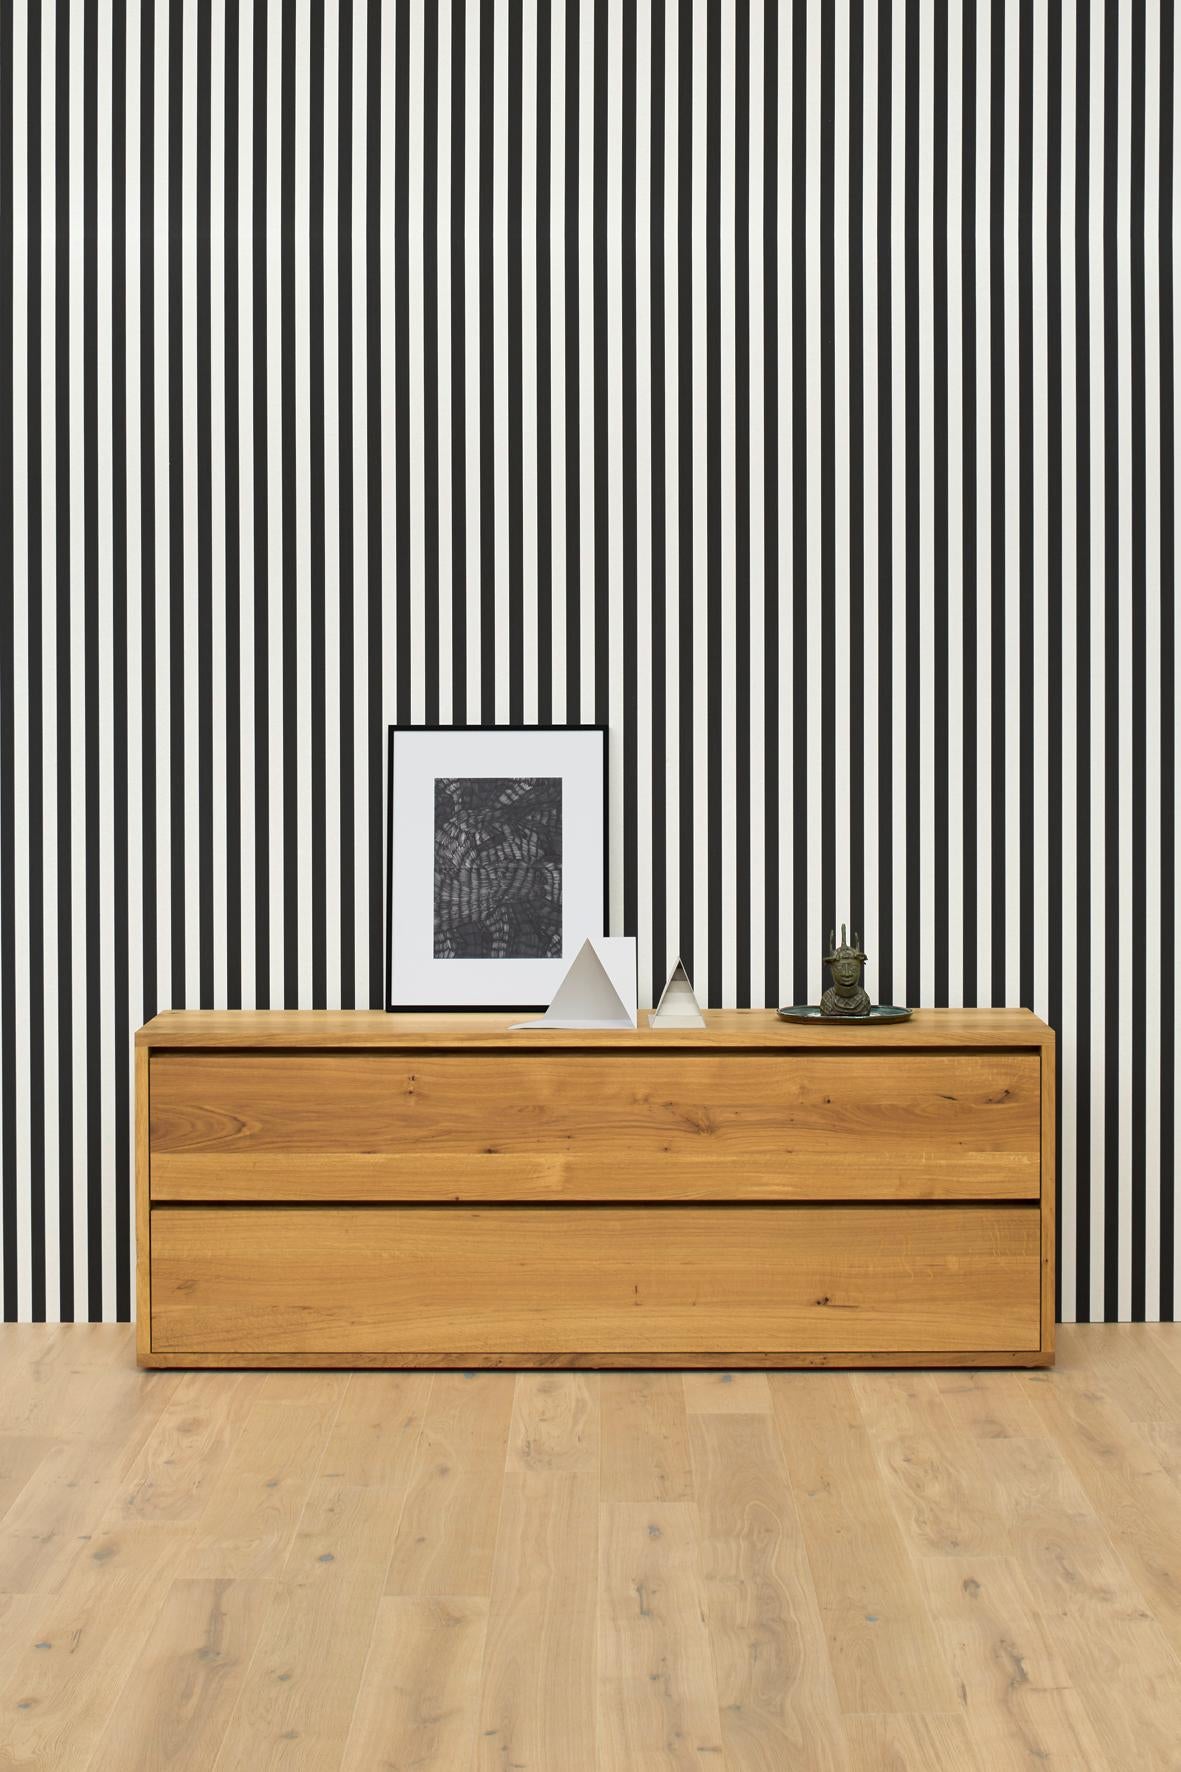 The solid wood chest of drawers IMARI expresses e15’s refined simplicity coupled with quality craftsmanship in its furniture. IMARI blends superbly with the beds MO or NOAH.

Please inquire about other finishes and sizes as they are also